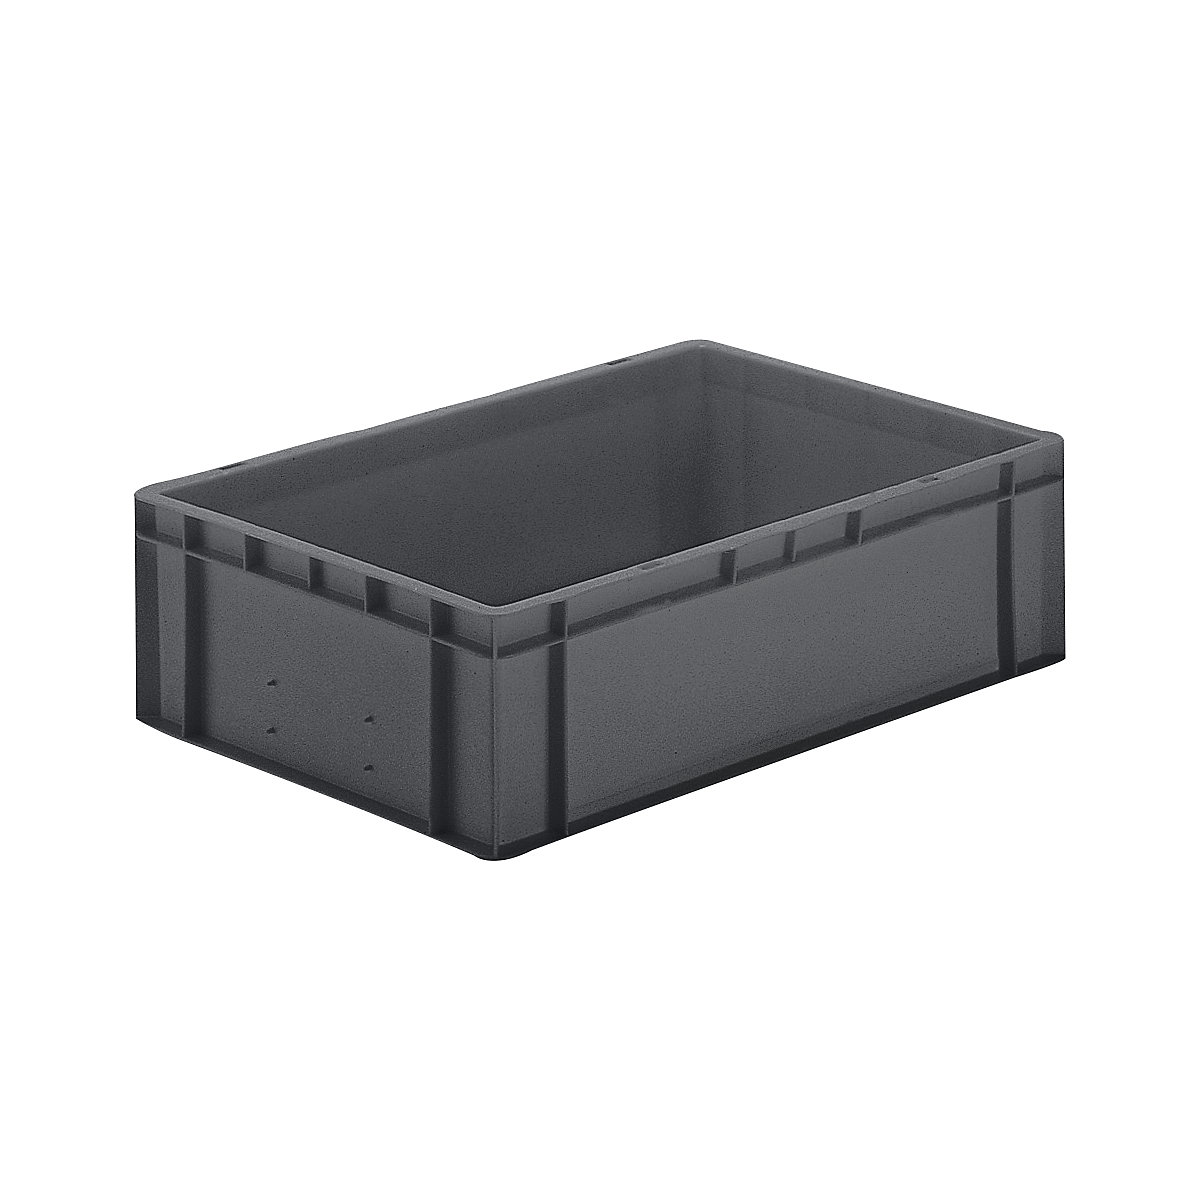 Euro stacking container, closed walls and base, LxWxH 600 x 400 x 175 mm, grey, pack of 5-8